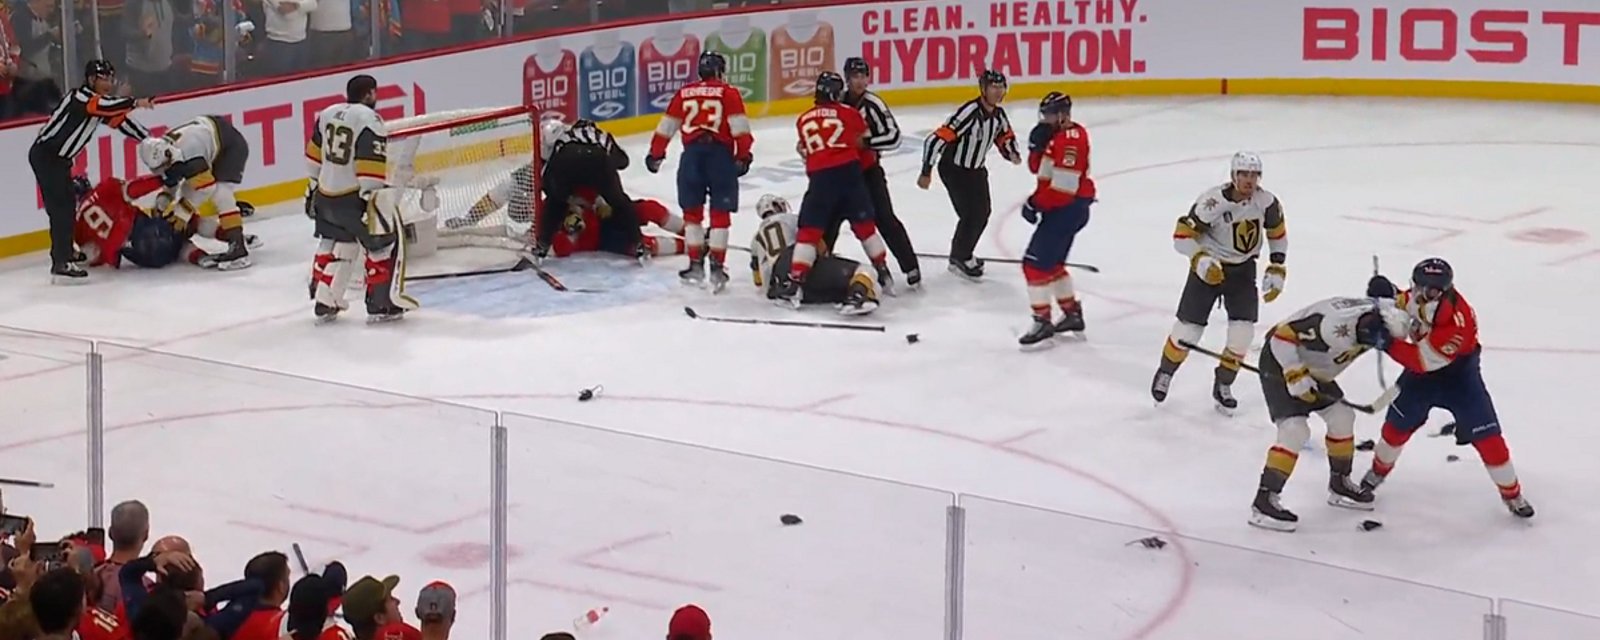 Chaos erupts on the ice after the final whistle in Game 4.